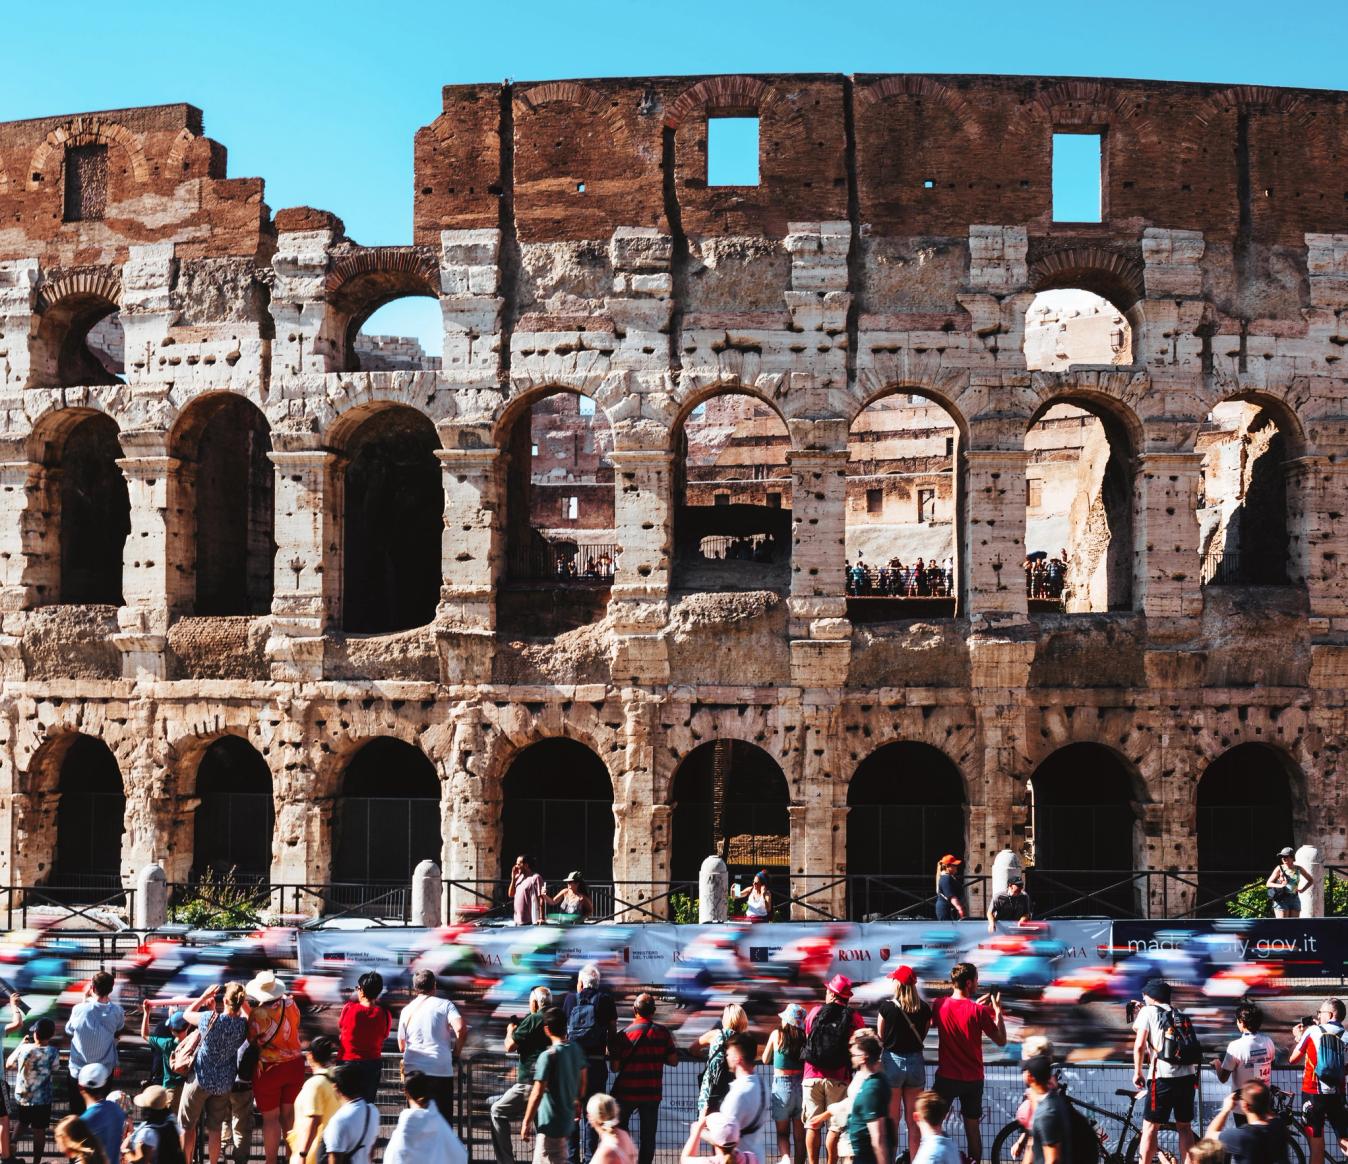 Rome's most famous monument, the Colosseum, was a neat aspect of the circuit around Rome